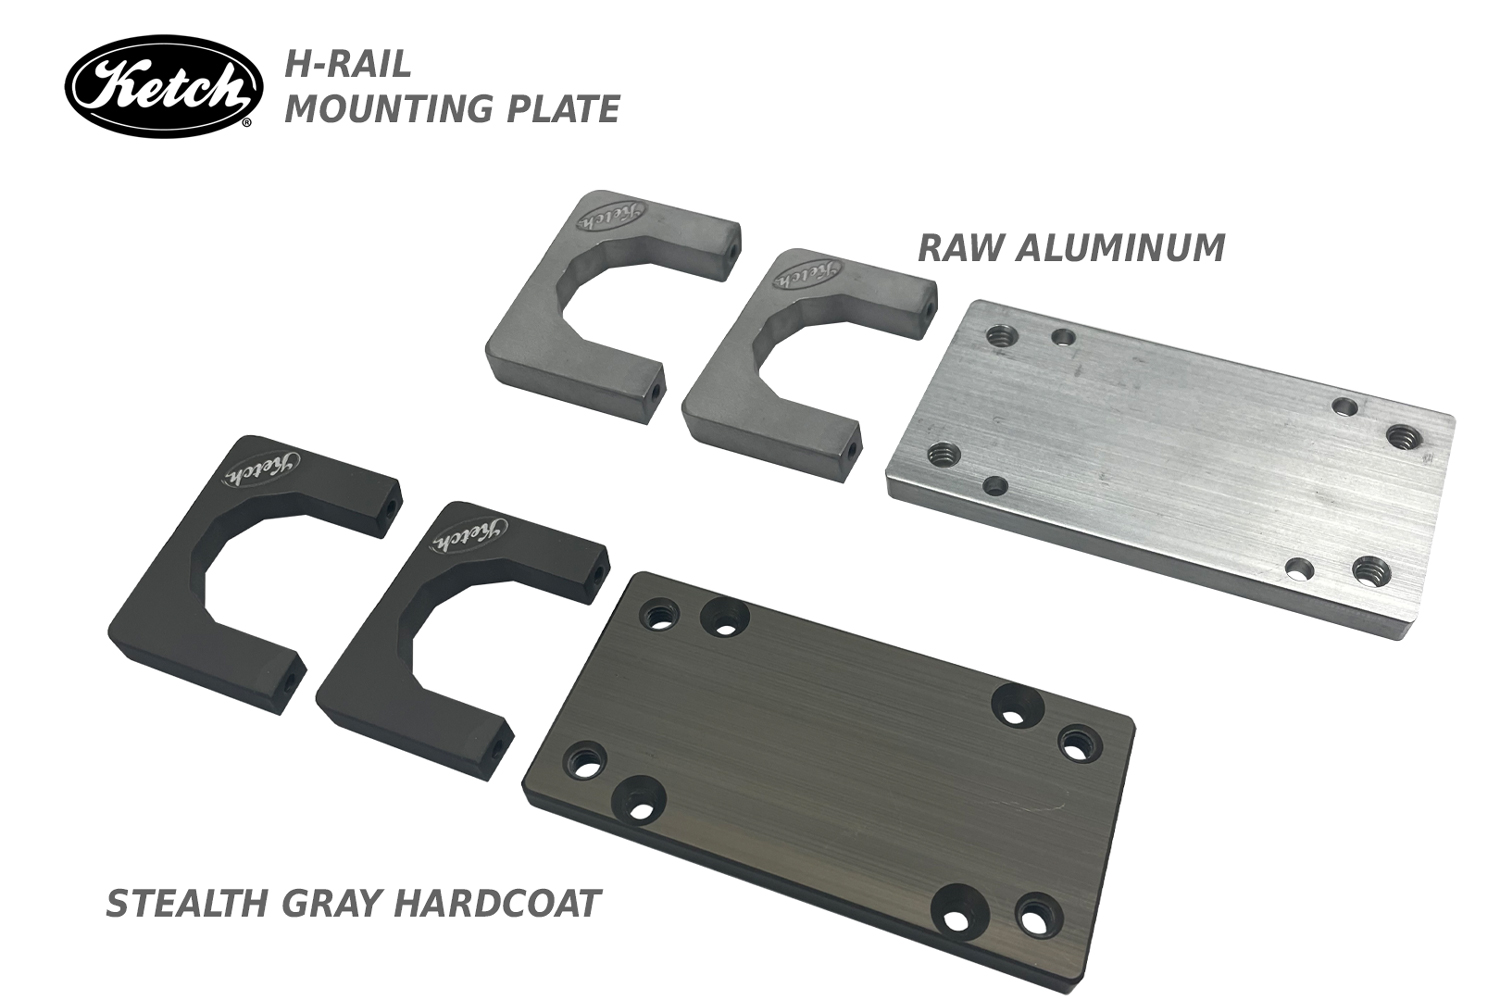 Ketch H-Rail Mounting Plate – Ketch Products